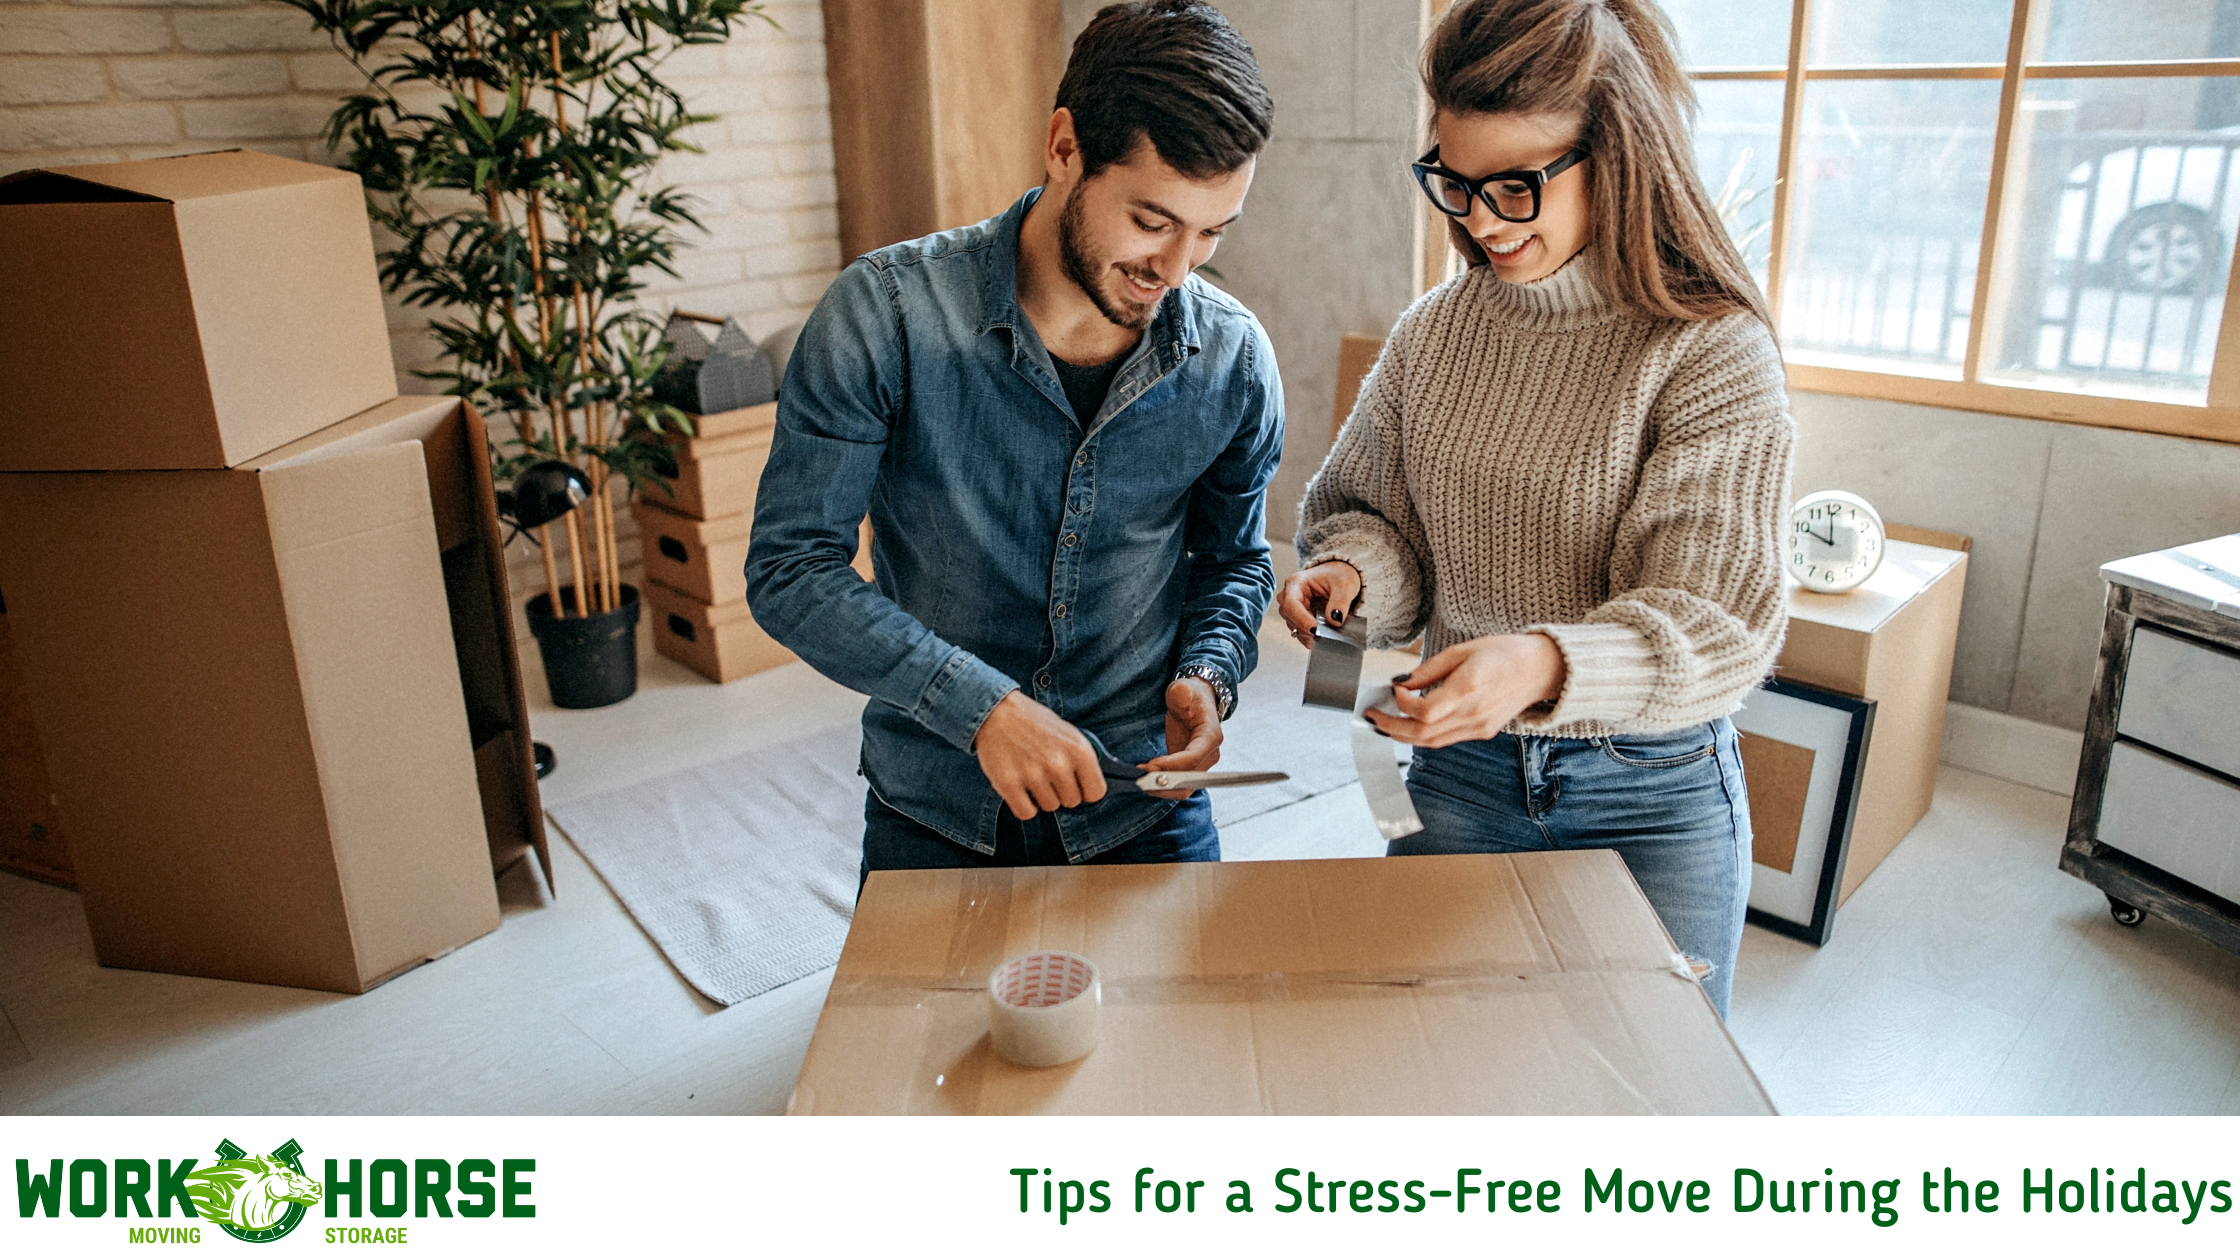 Tips for a Stress-Free Holiday Move